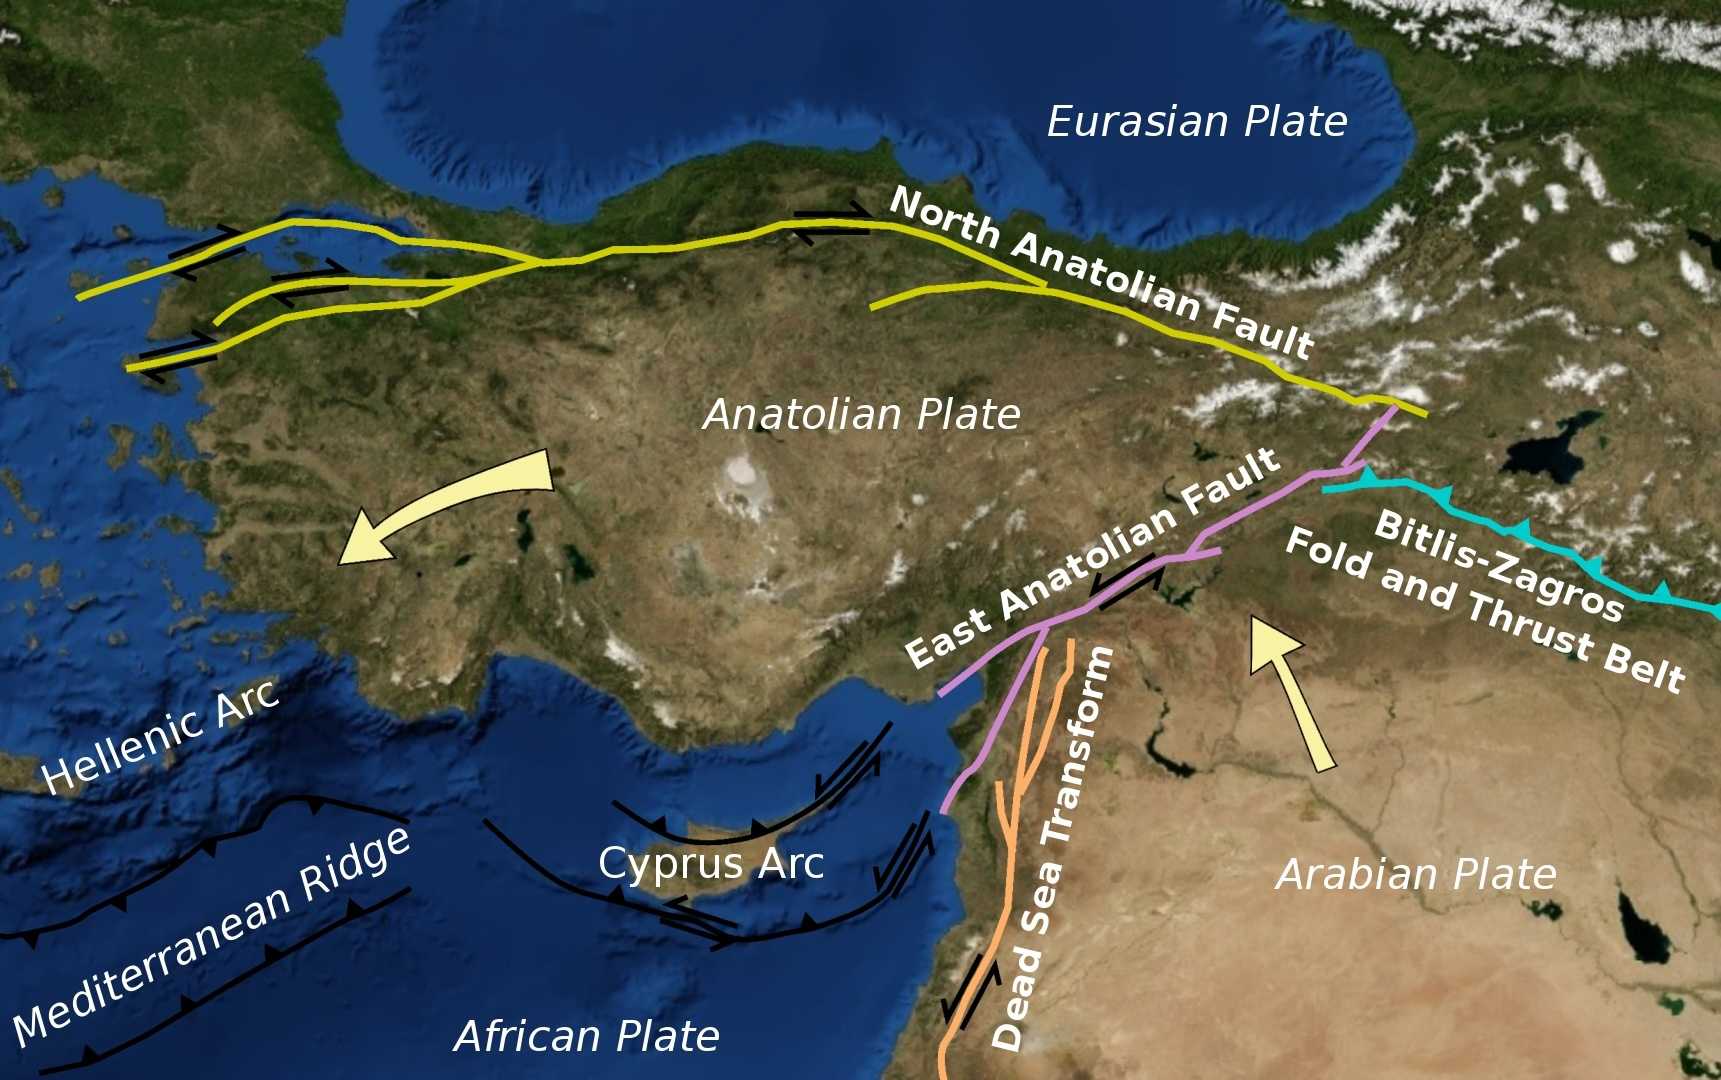 The North Anatolian and neighbouring faults covering most of Turkey
